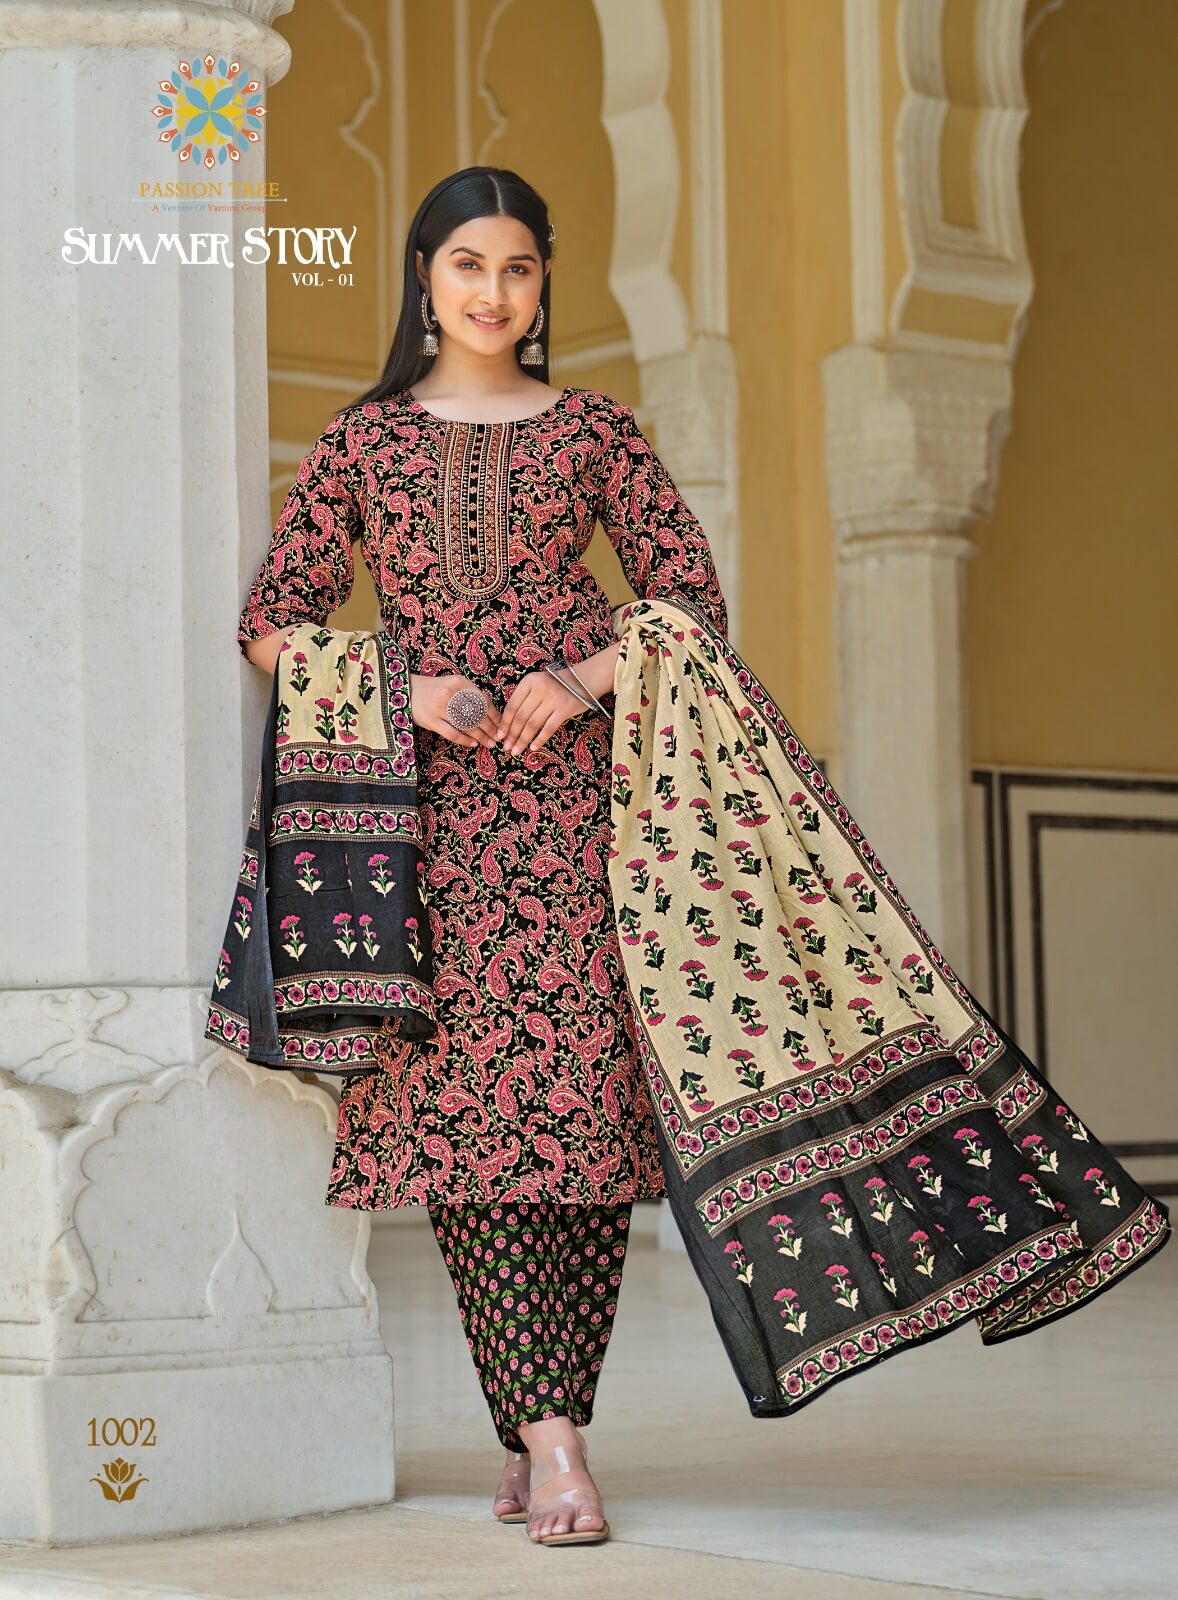 Passion Tree Summer Story vol 1 Printed Salwar Kameez collection 5